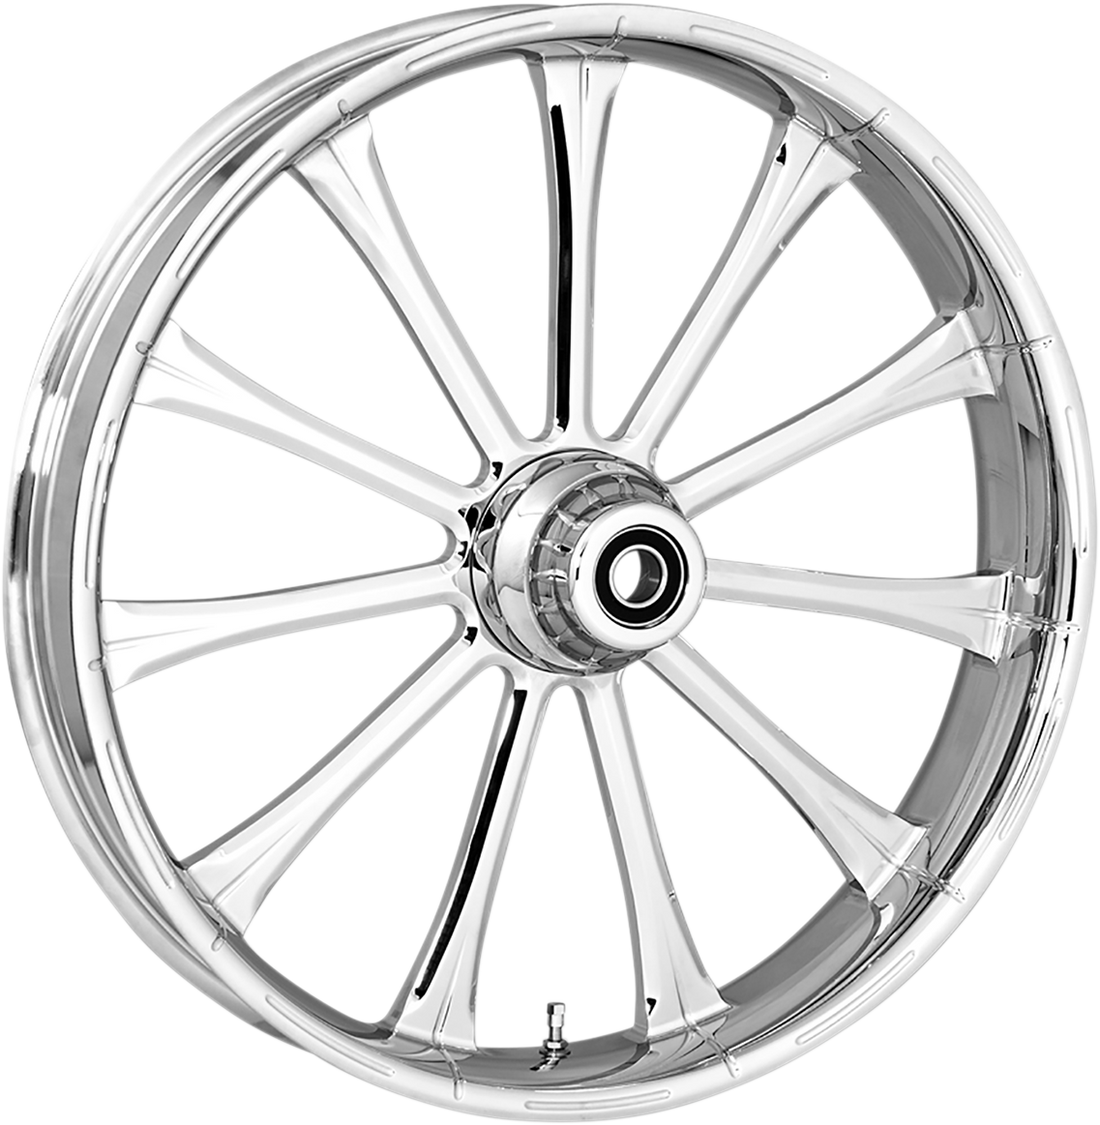 RC COMPONENTS Exile Front Wheel - Dual Disc/ABS - Chrome - 23"x3.75" 233759031A14122